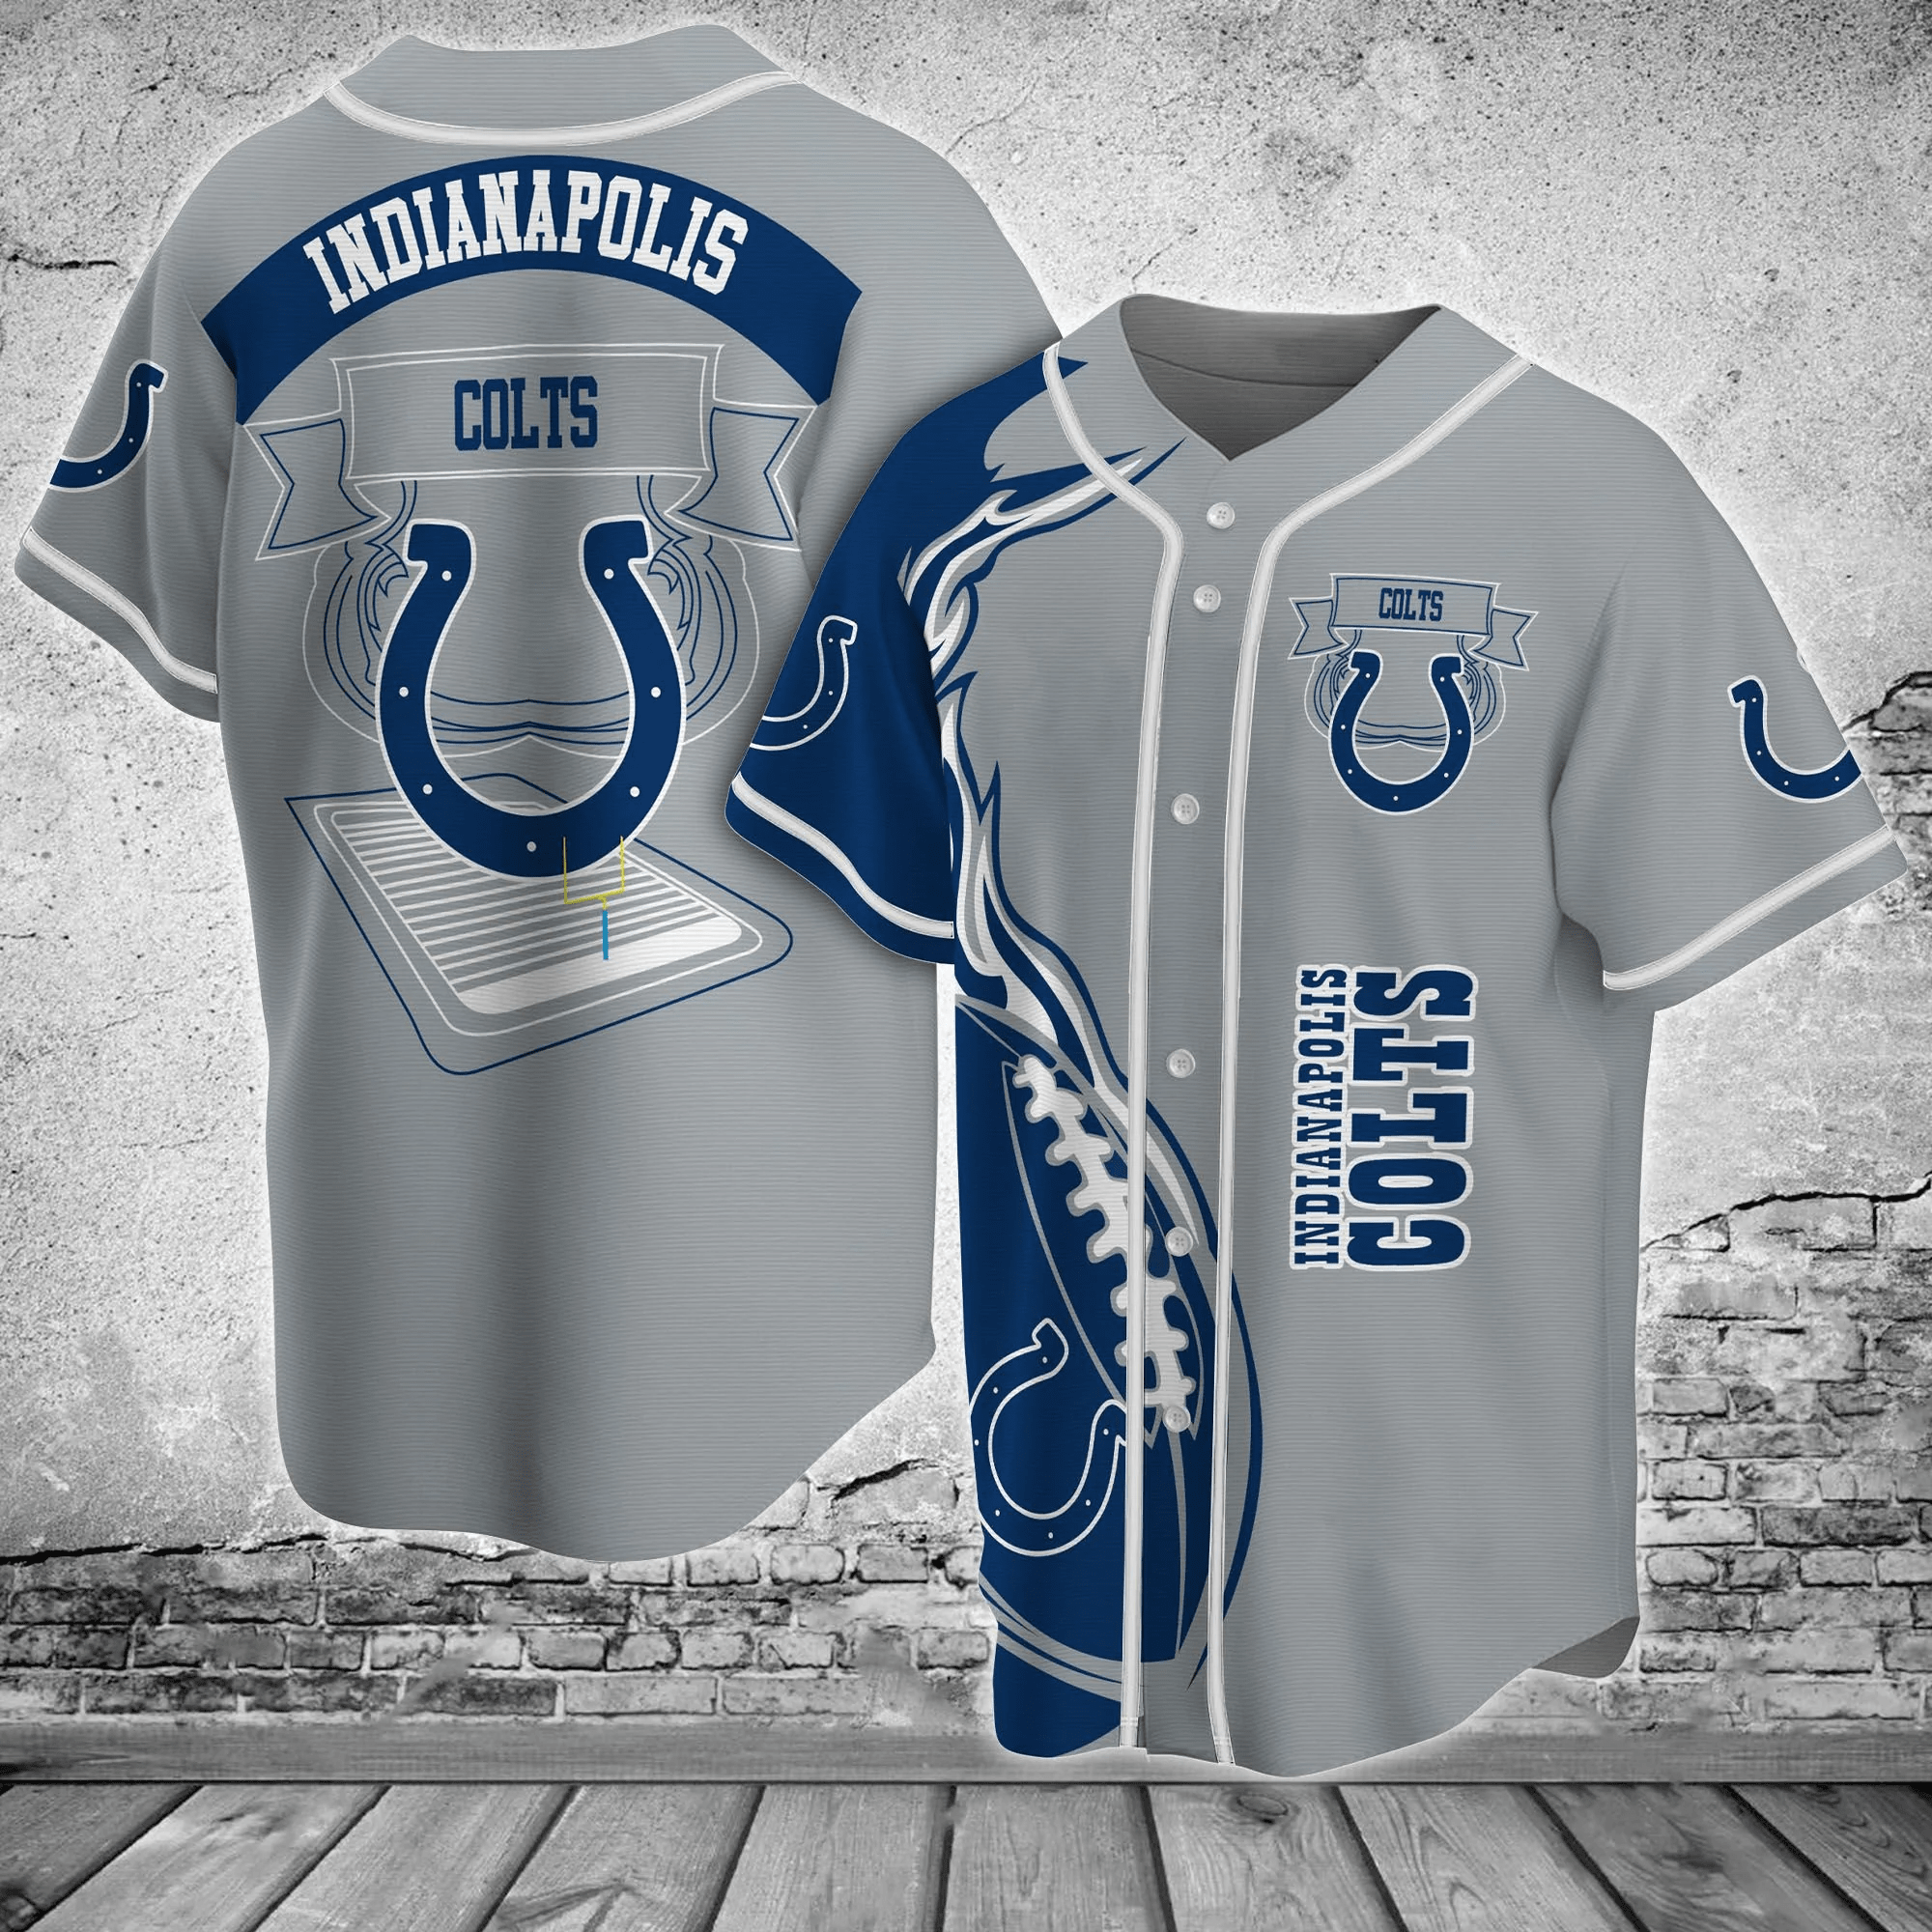 Indianapolis Colts Team Baseball Jersey Shirt for Game Day